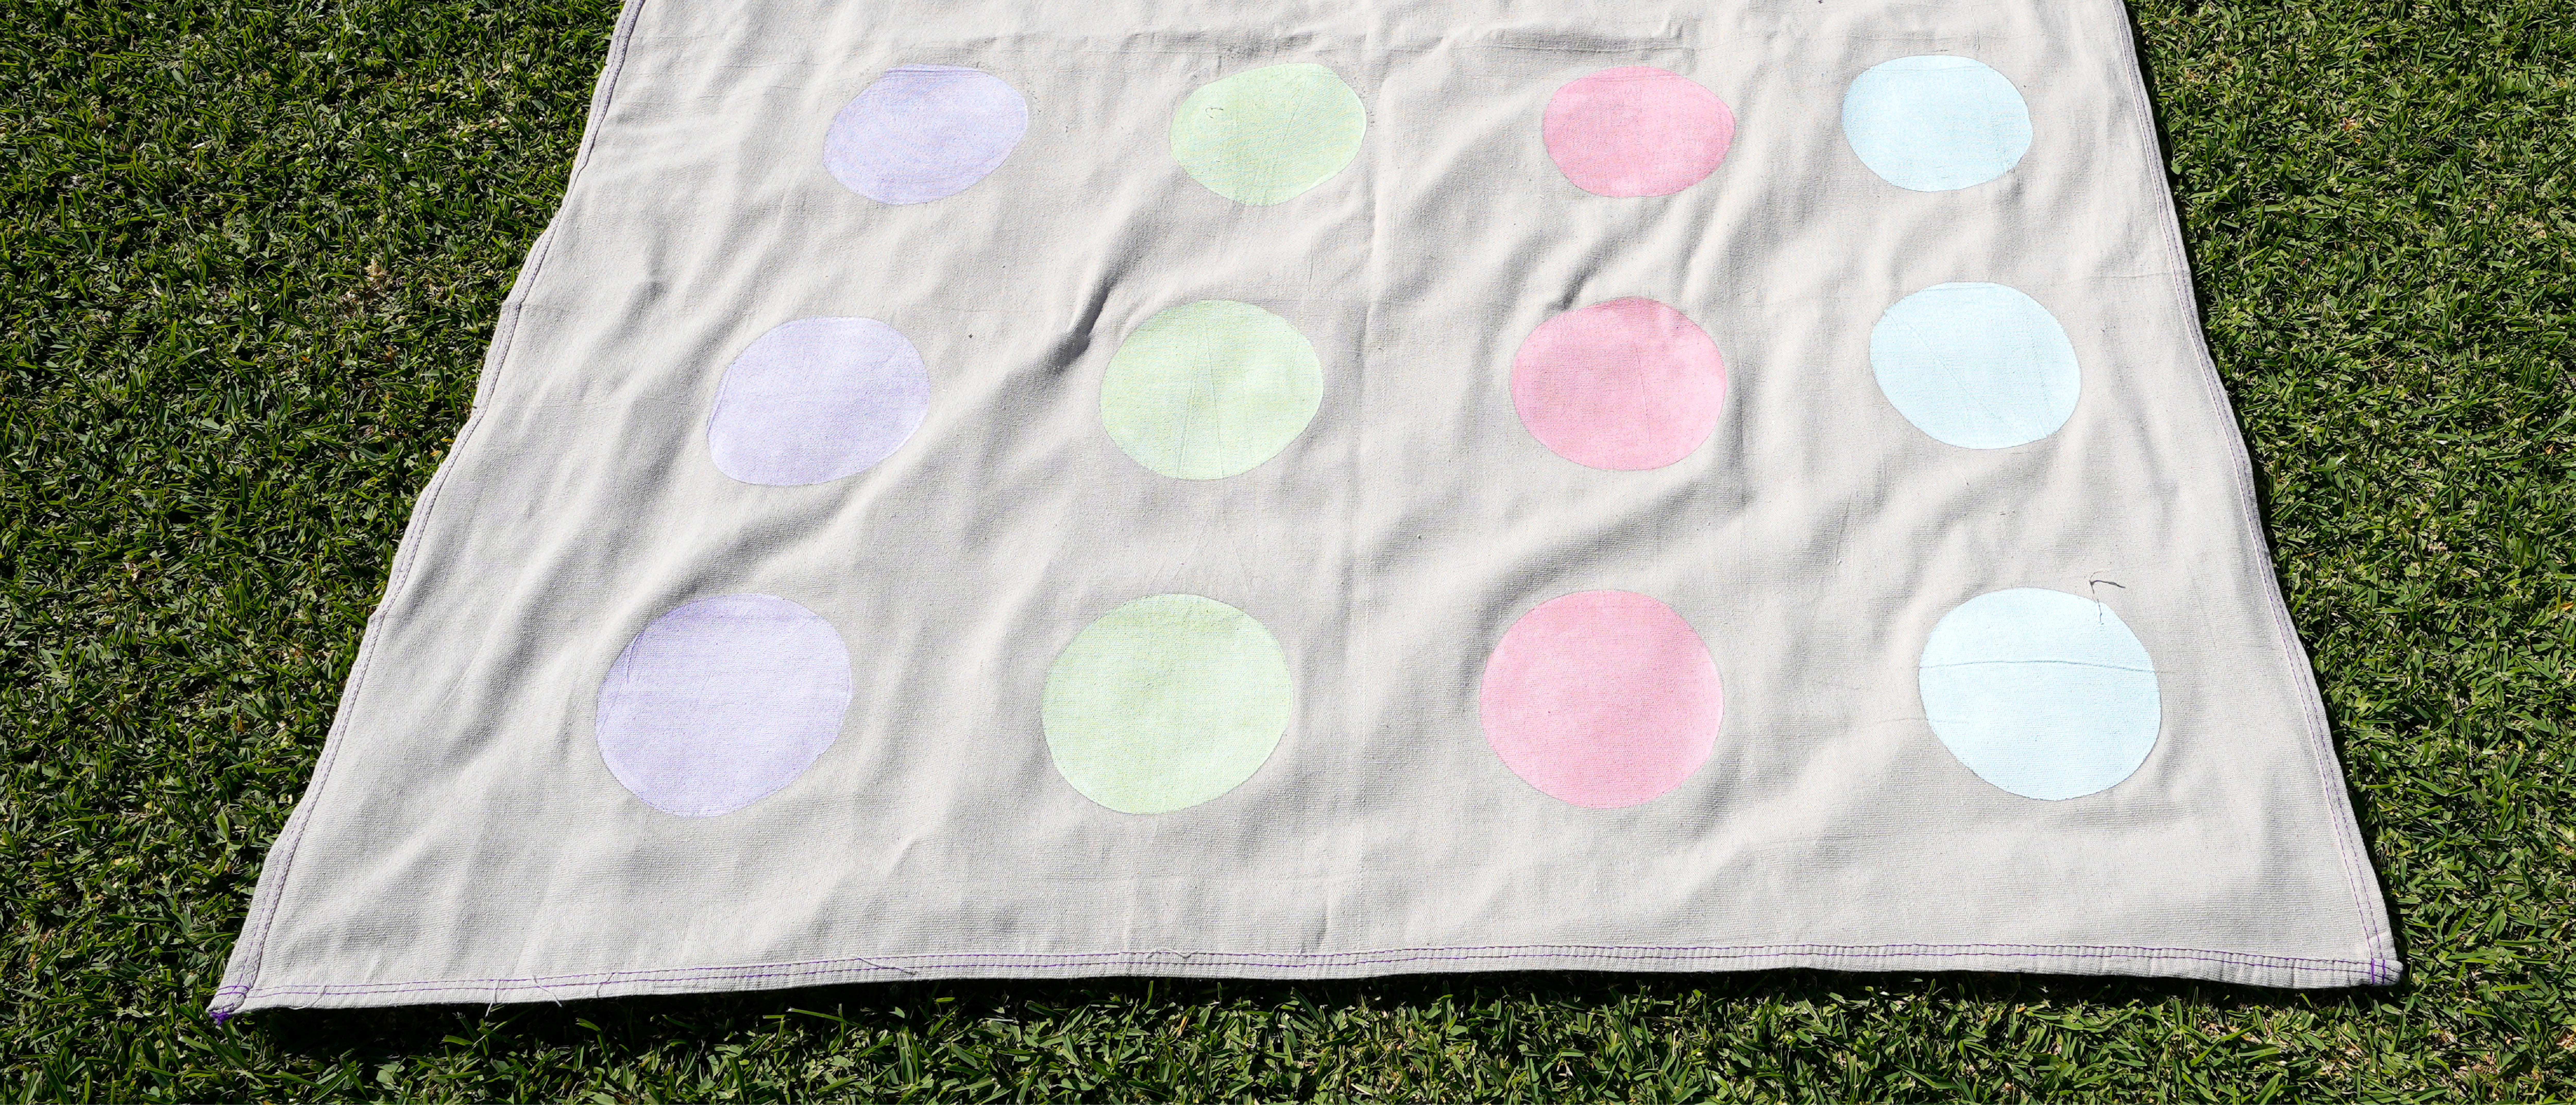 How To Make A Canvas Drop Sheet Twister Game